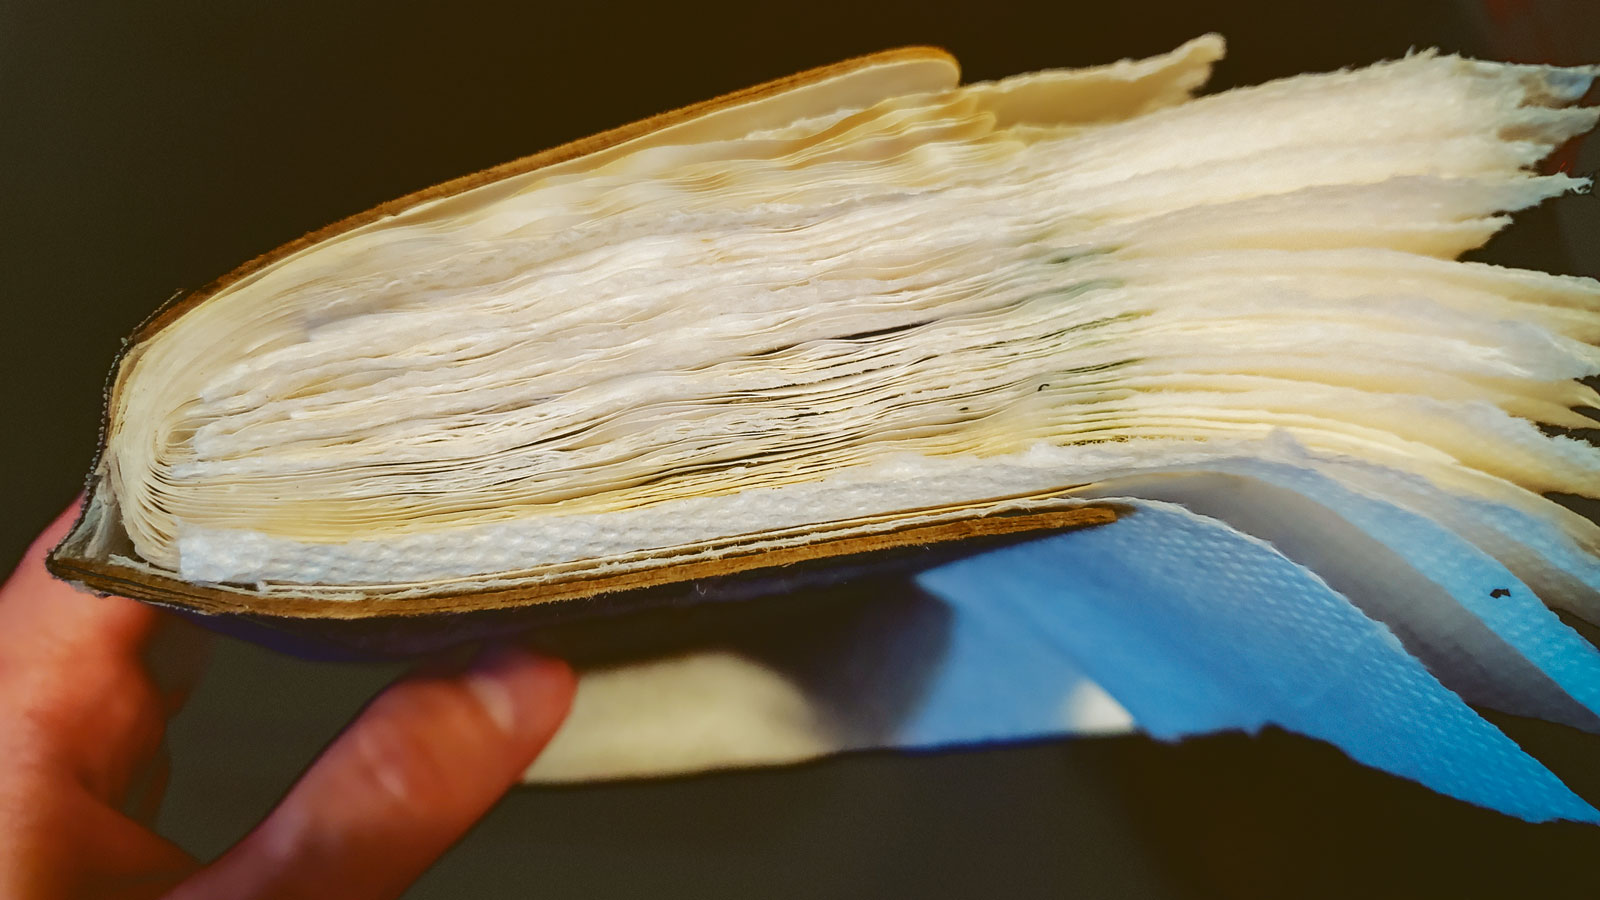 A close-up shot of a notebook with paper towels between the pages.